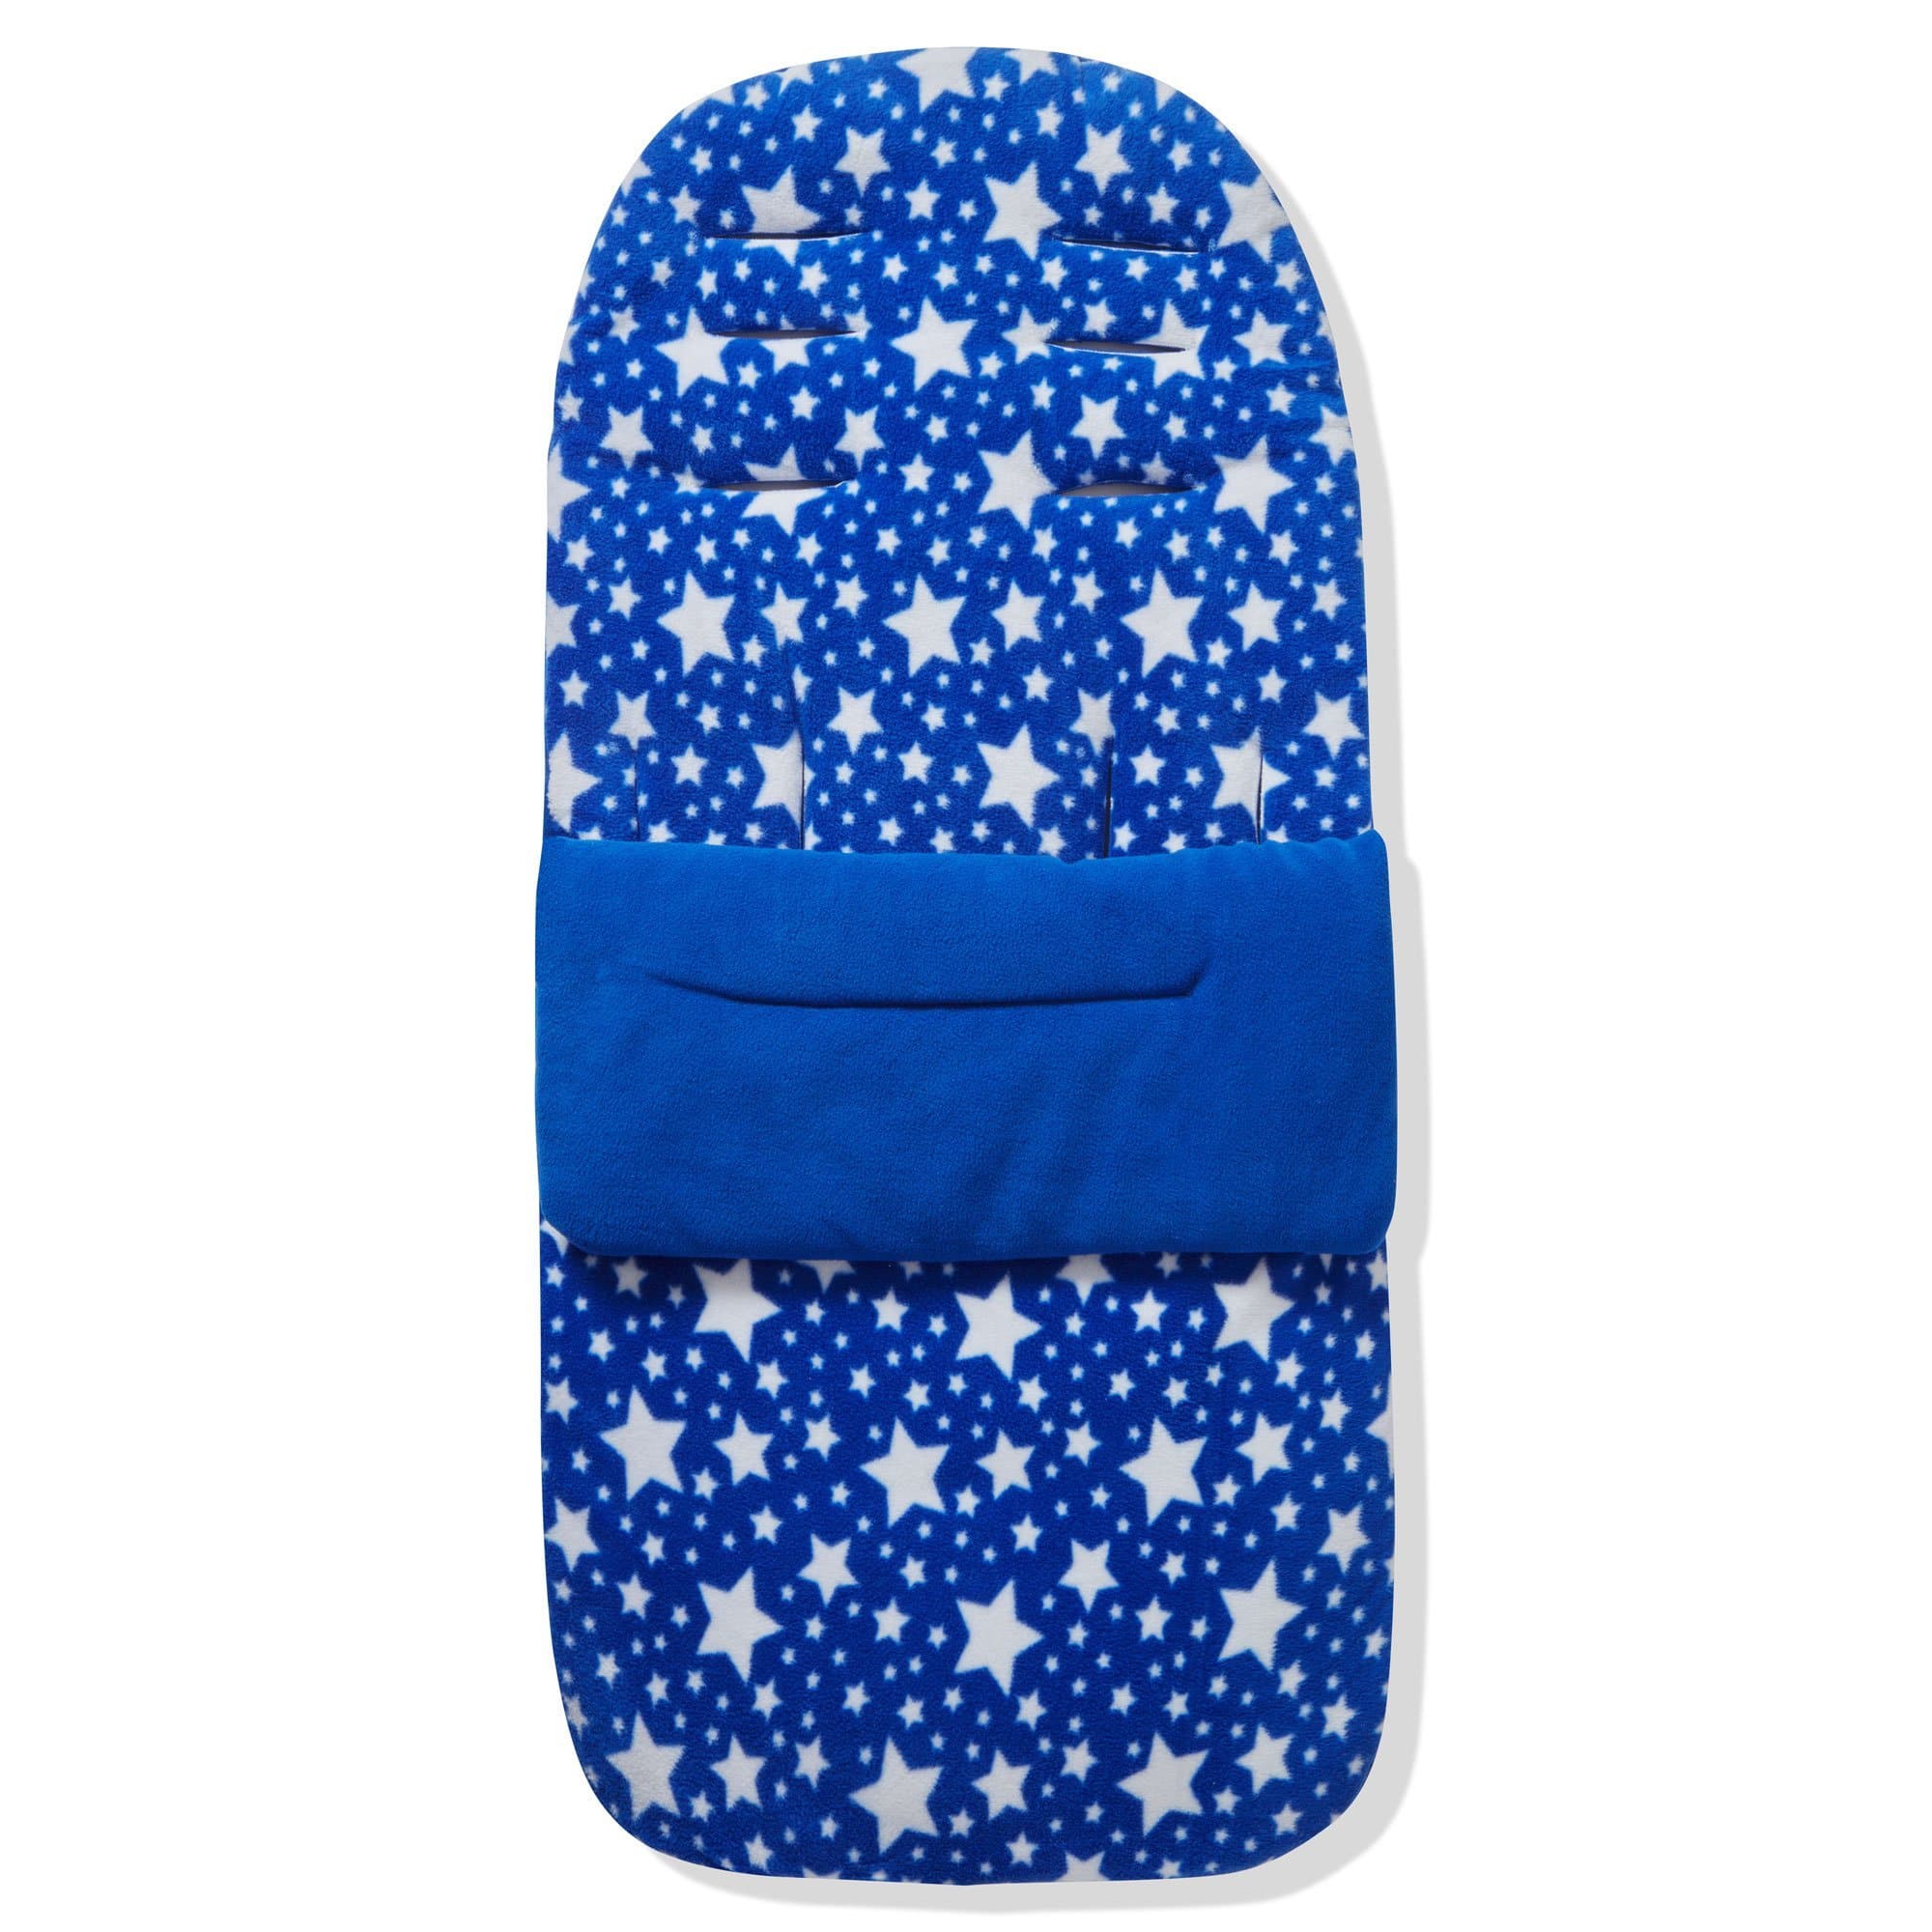 Fleece Footmuff / Cosy Toes Compatible with Greentom - Blue Star / Fits All Models | For Your Little One